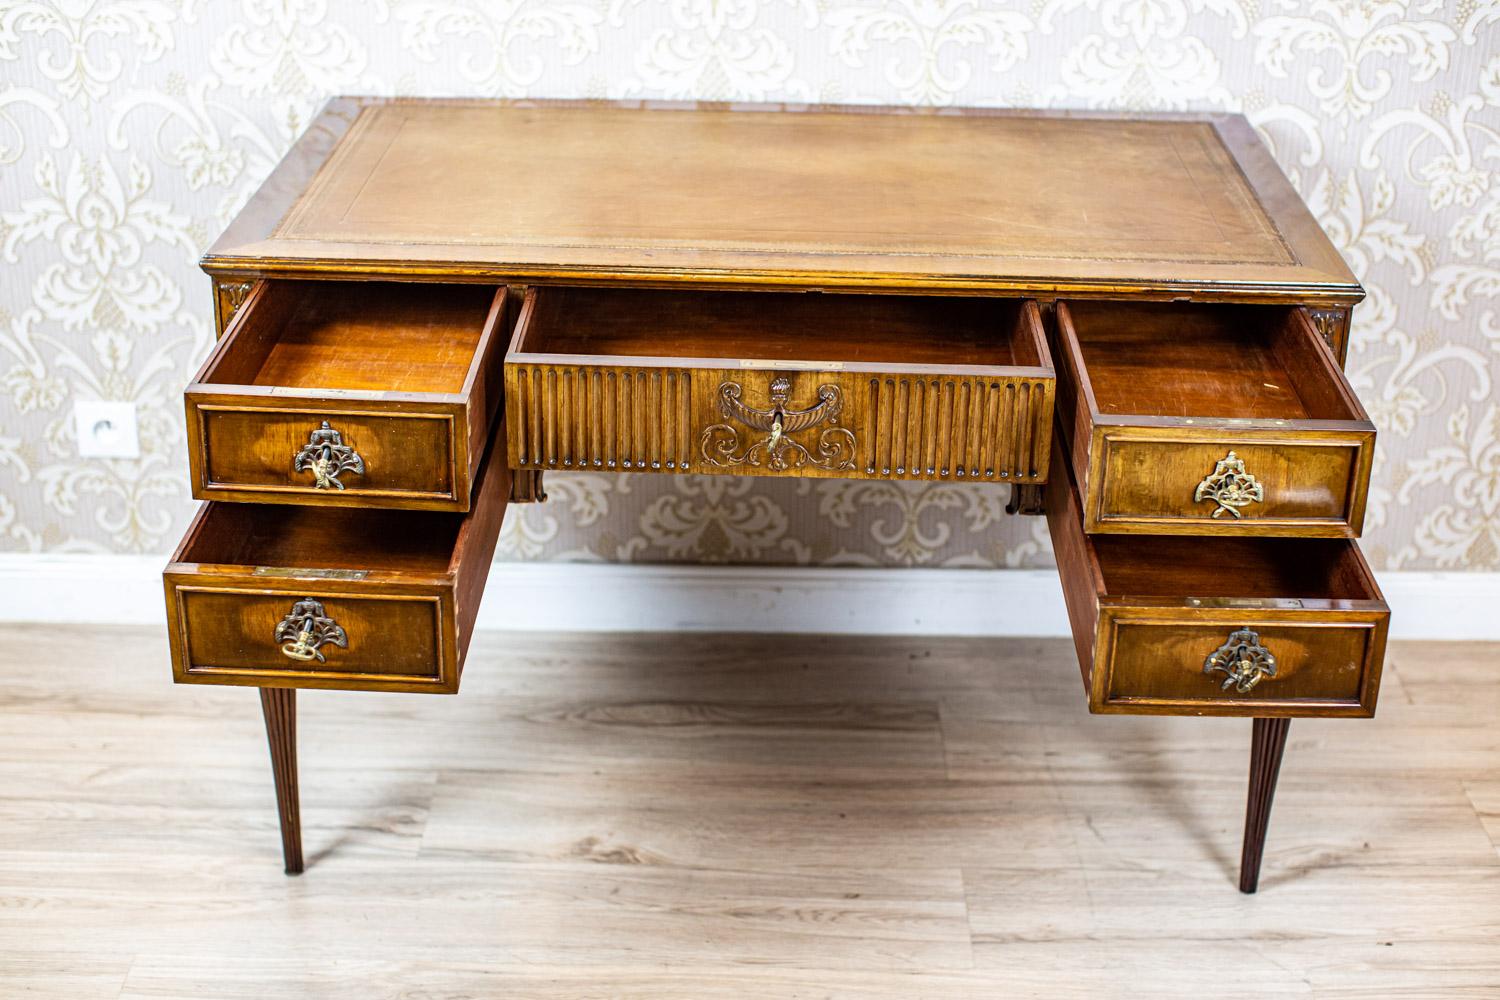 European Lady's Mahogany Desk from the Late 19th Century in Brass Details